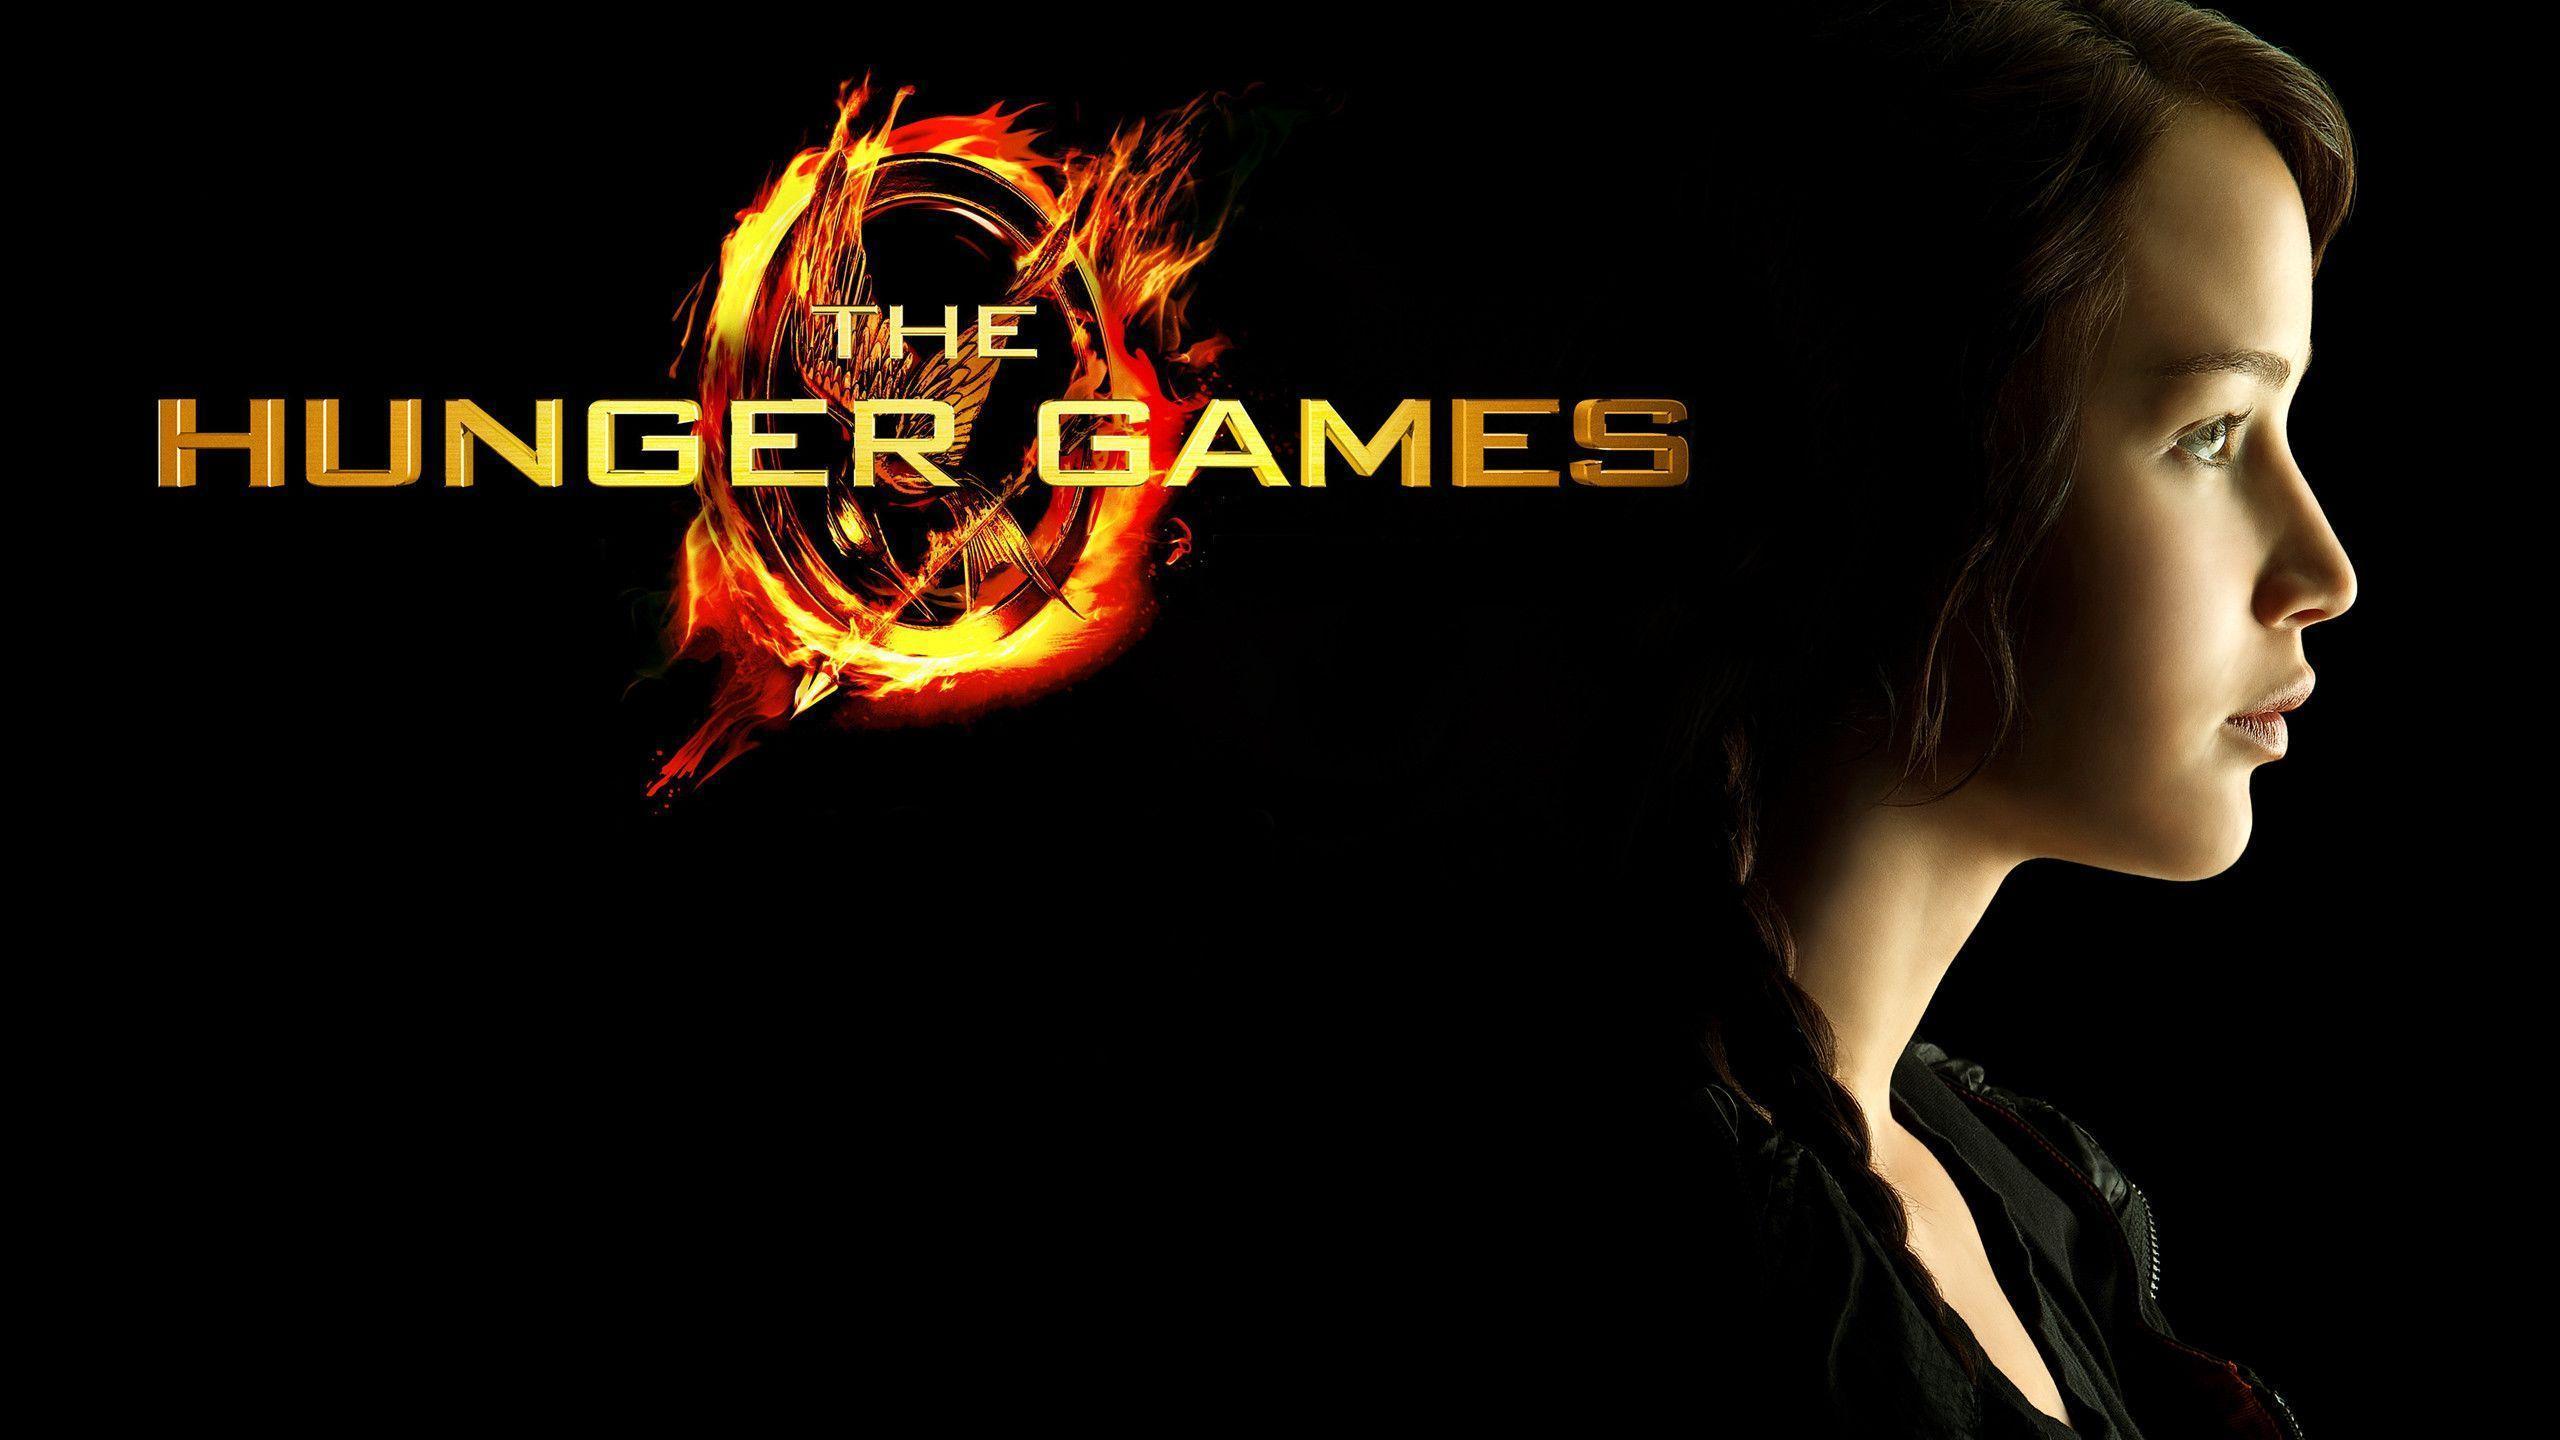 Hunger Games Wallpaper Android 143 Game Gaming Pc Mac Android